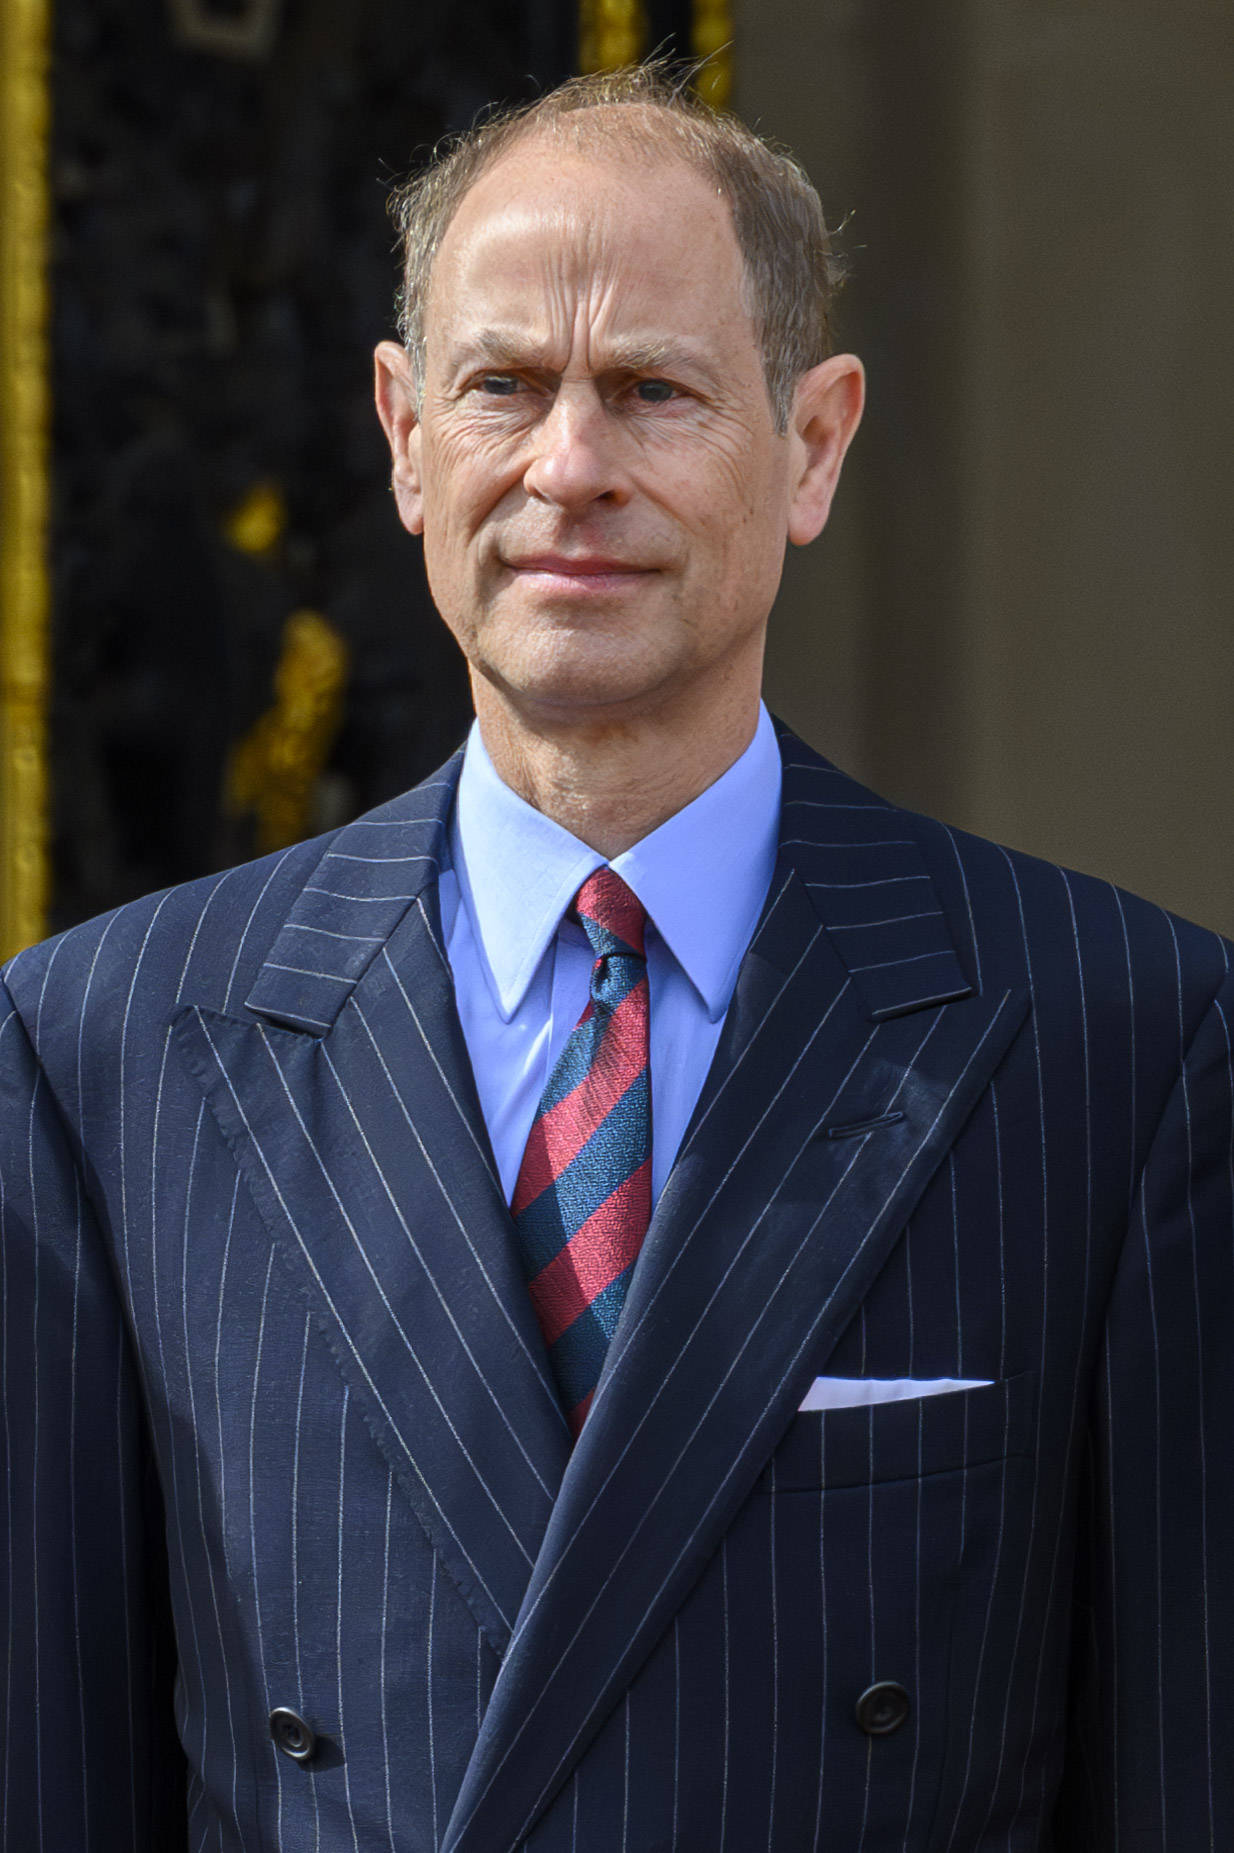 <p>Queen Elizabeth II's youngest son, Prince Edward, is 14th in line to the throne. He was made Earl of Wessex right before he married Sophie Rhys-Jones in 1999. And on the occasion of his 59th birthday in March 2023, big brother King Charles III gave him a new title: Duke of Edinburgh, which previously belonged to their late father, Prince Philip. </p><p>However, there's a caveat: "The title will be held by Prince Edward for His Royal Highness's lifetime," Buckingham Palace announced, meaning unlike most dukedoms, Edward's son will not inherit the title, which will revert back to the crown upon Edward's death.</p>